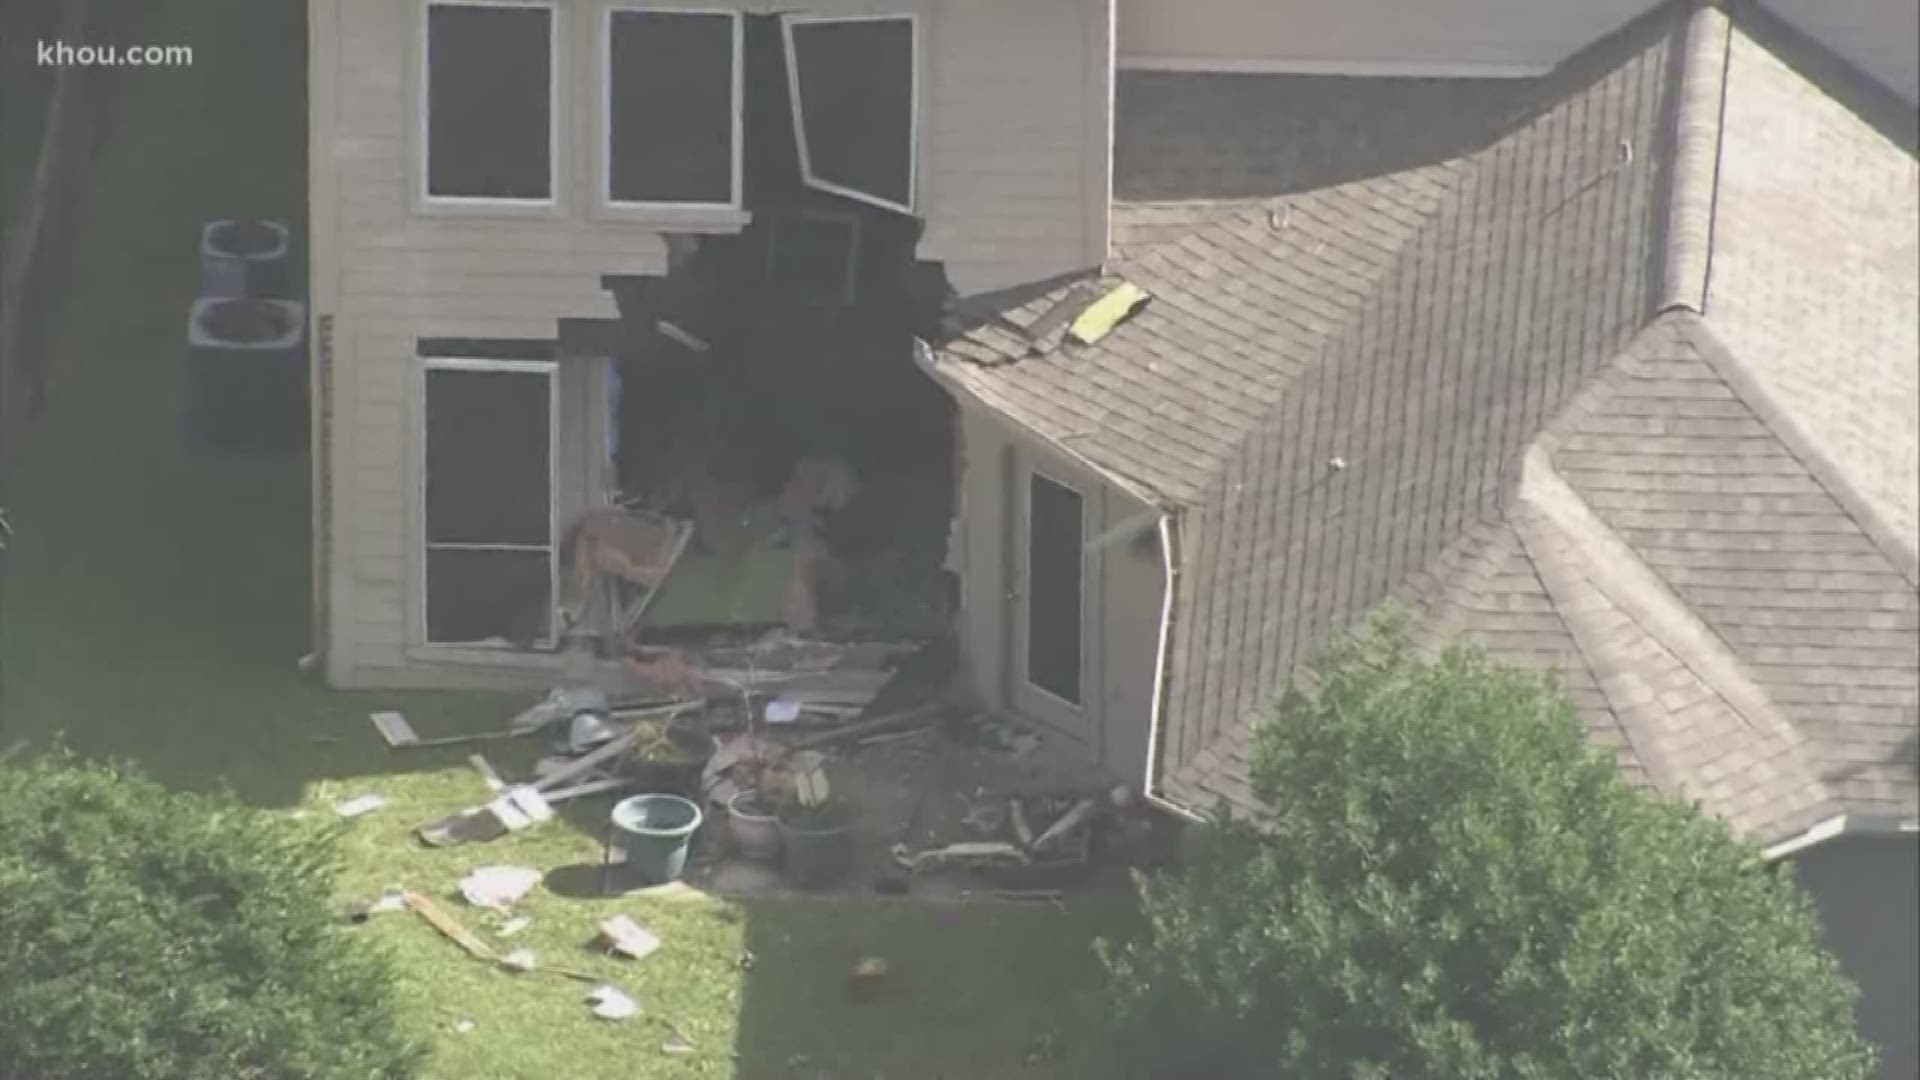 A 29-year-old driver has been charged with driving without a license and reckless driving after he plowed into a Katy home.